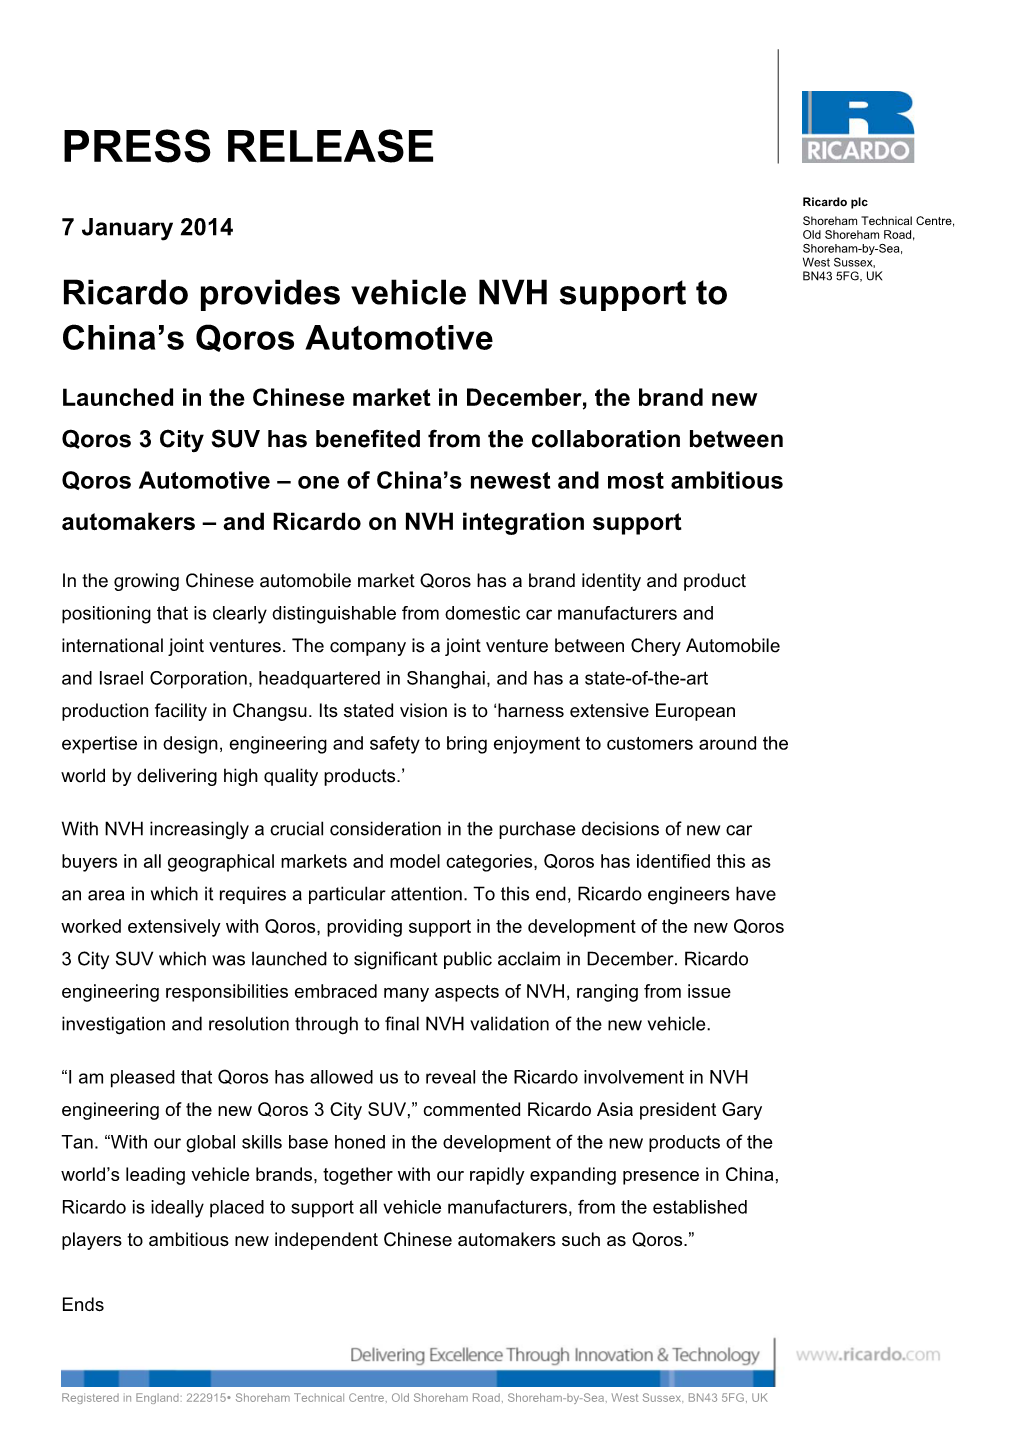 Press Release Text: Ricardo Provides Vehicle NVH Support to China's Qoros Automotive